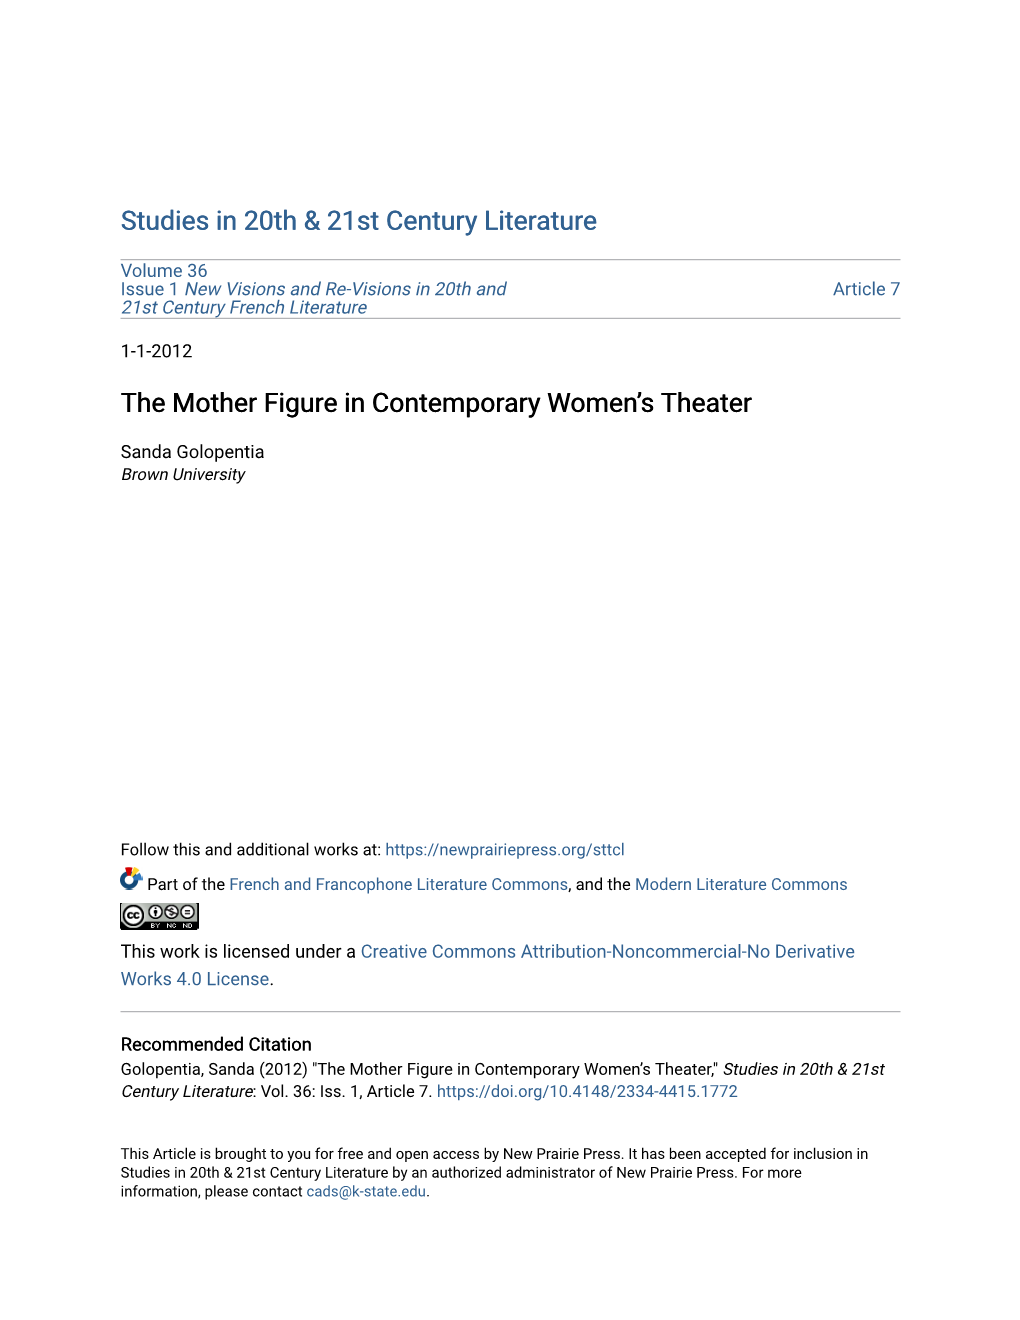 The Mother Figure in Contemporary Women's Theater